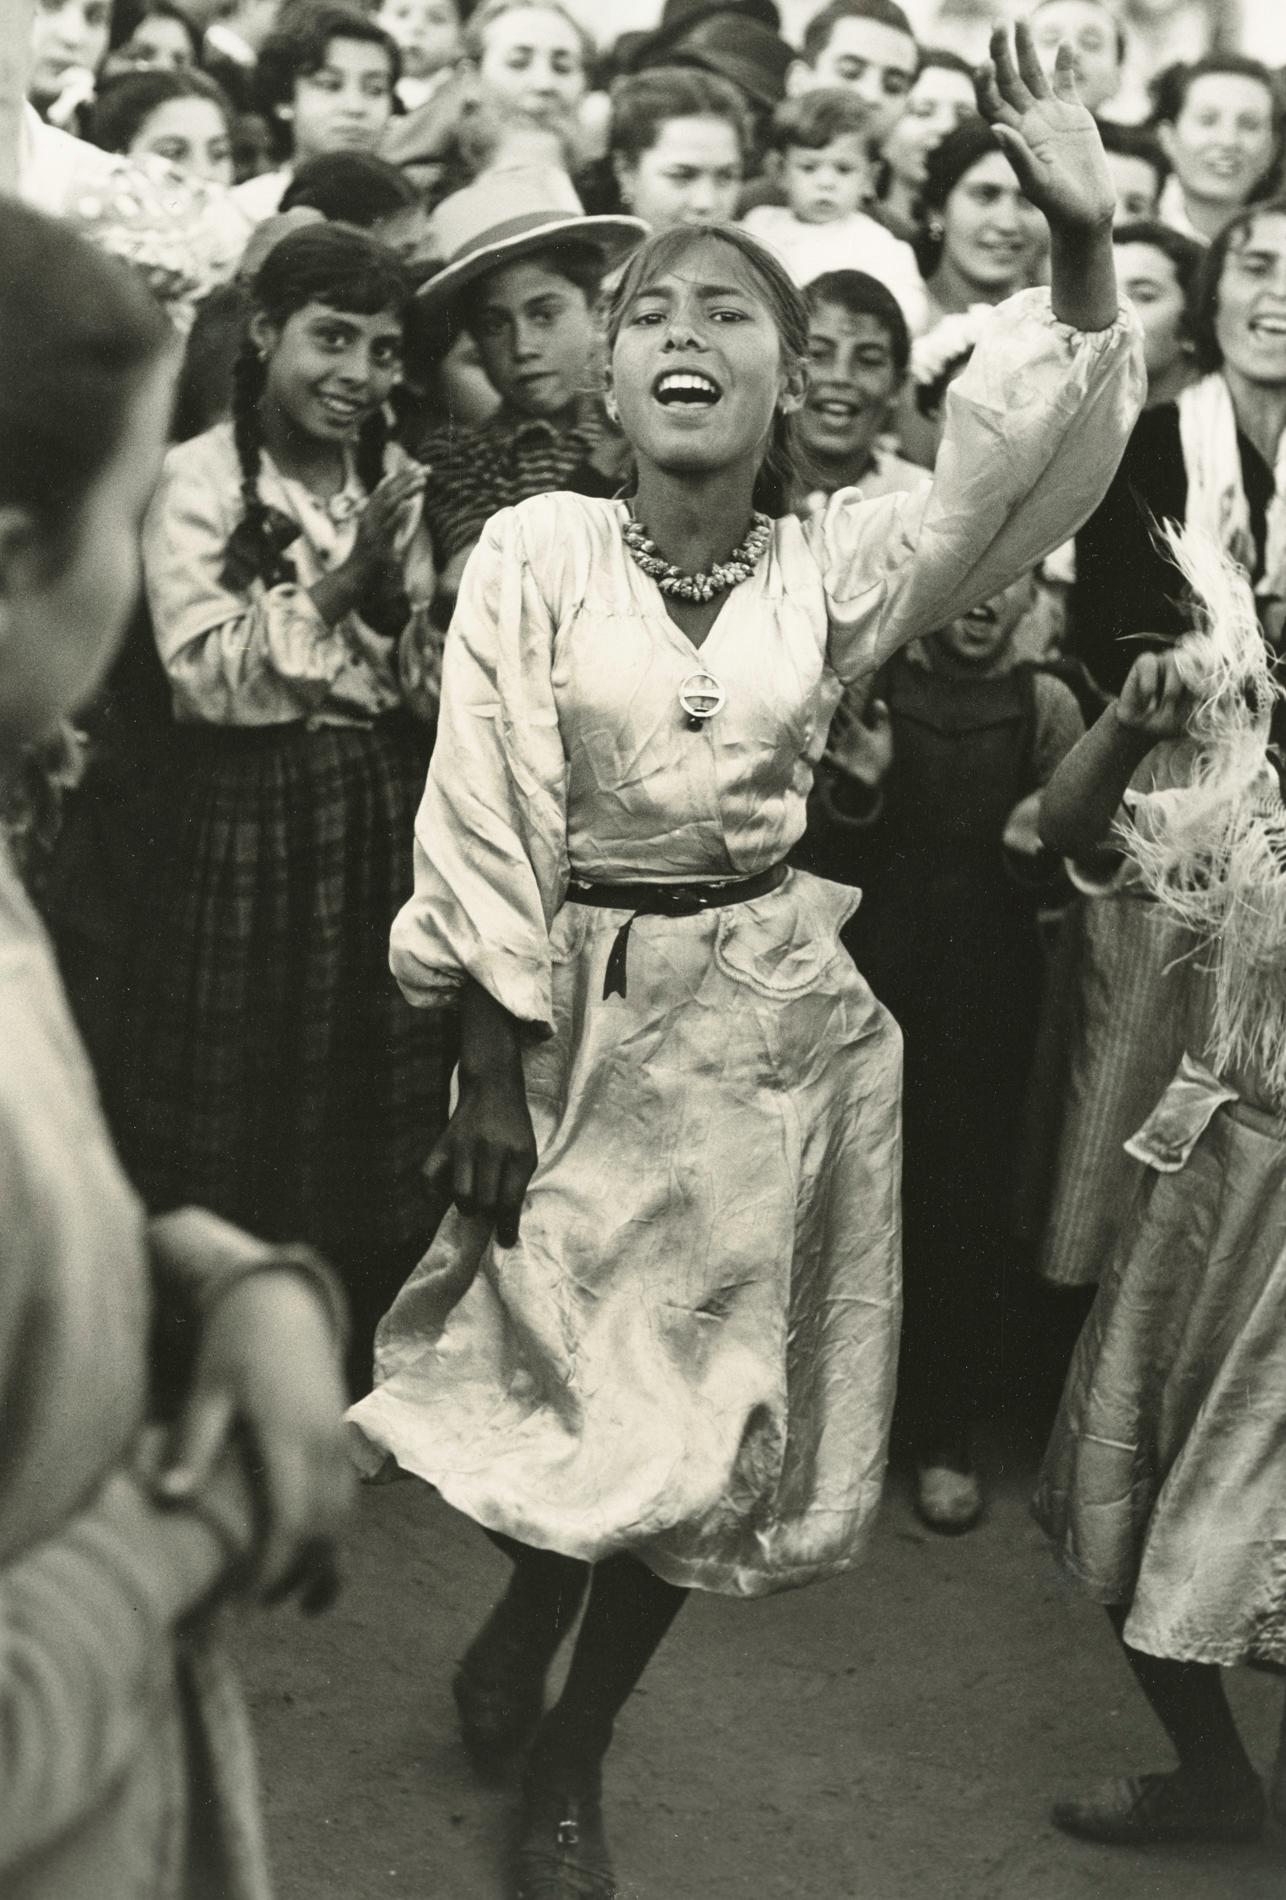 Ormond Gigli Black and White Photograph - Dancing Gypsy, Seville, Spain (1952)